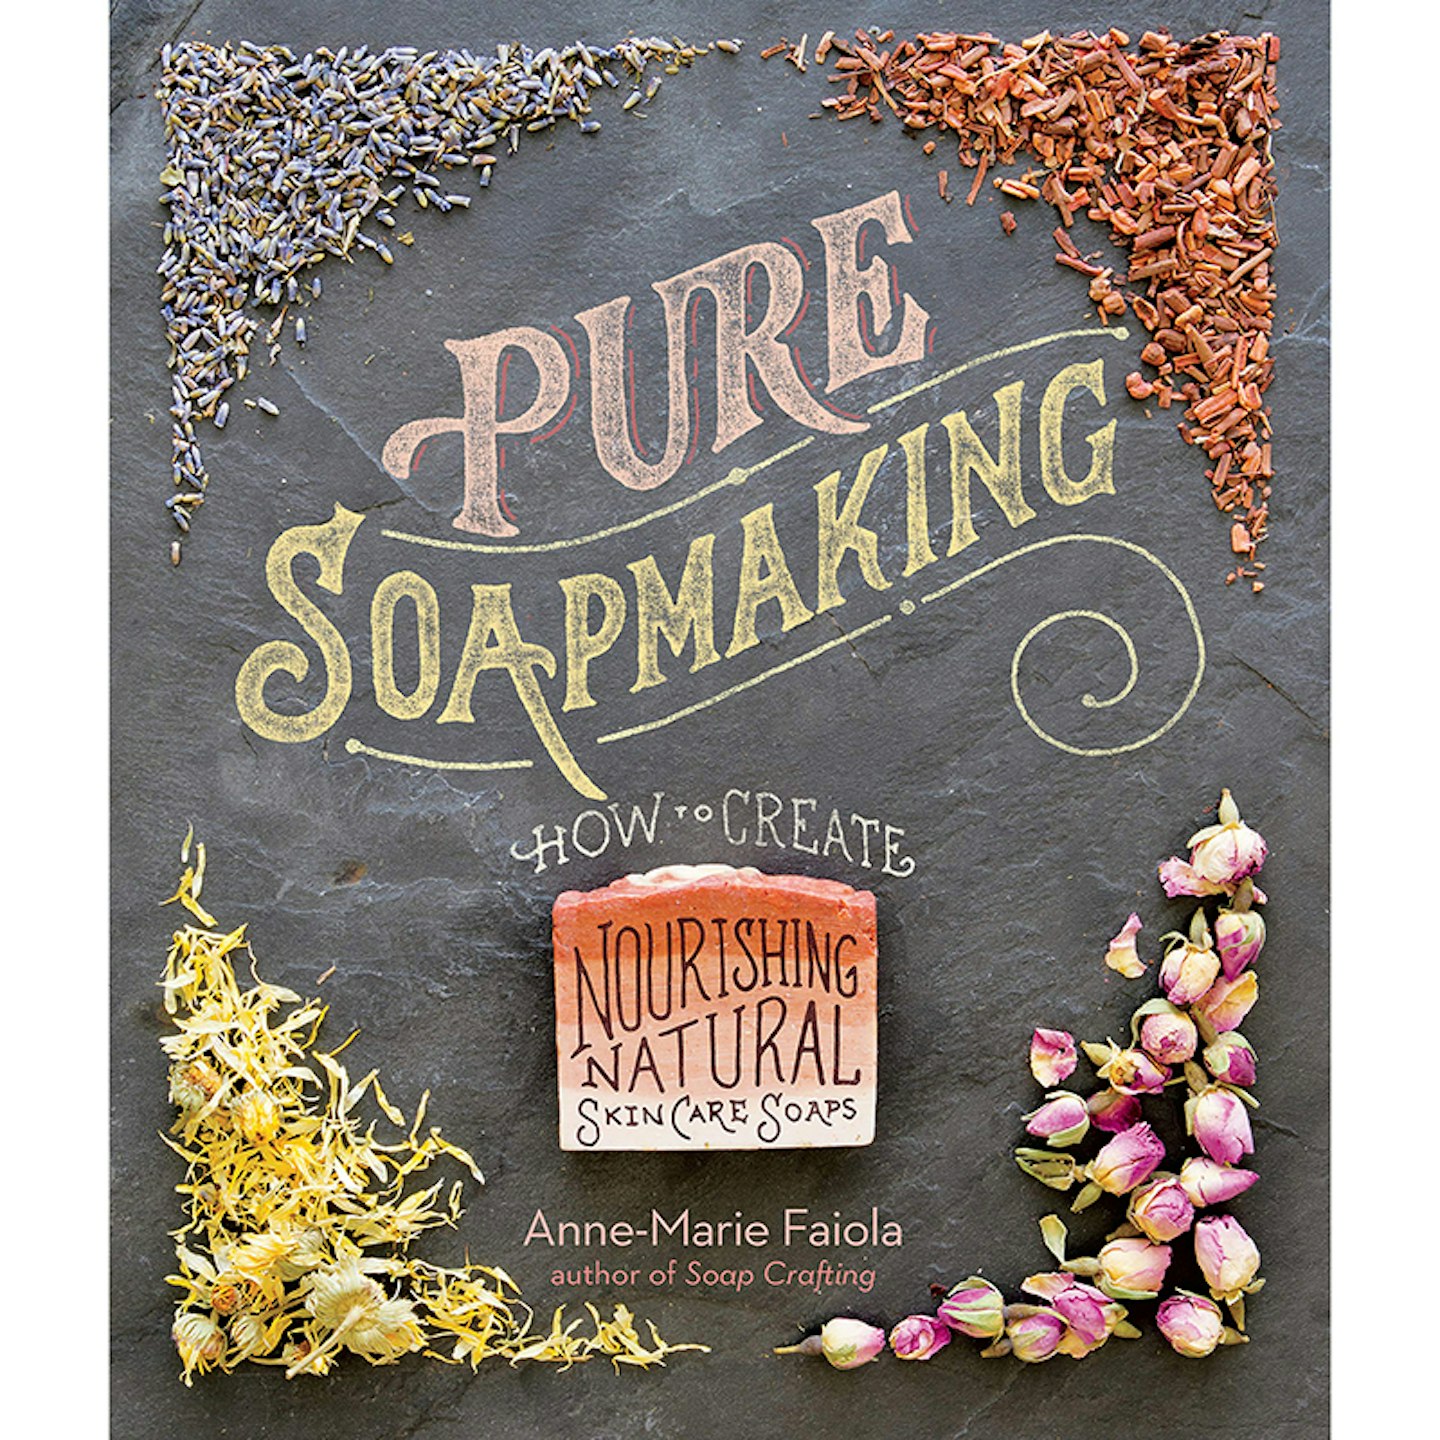 Pure Soapmaking by Anne-Marie Faiola